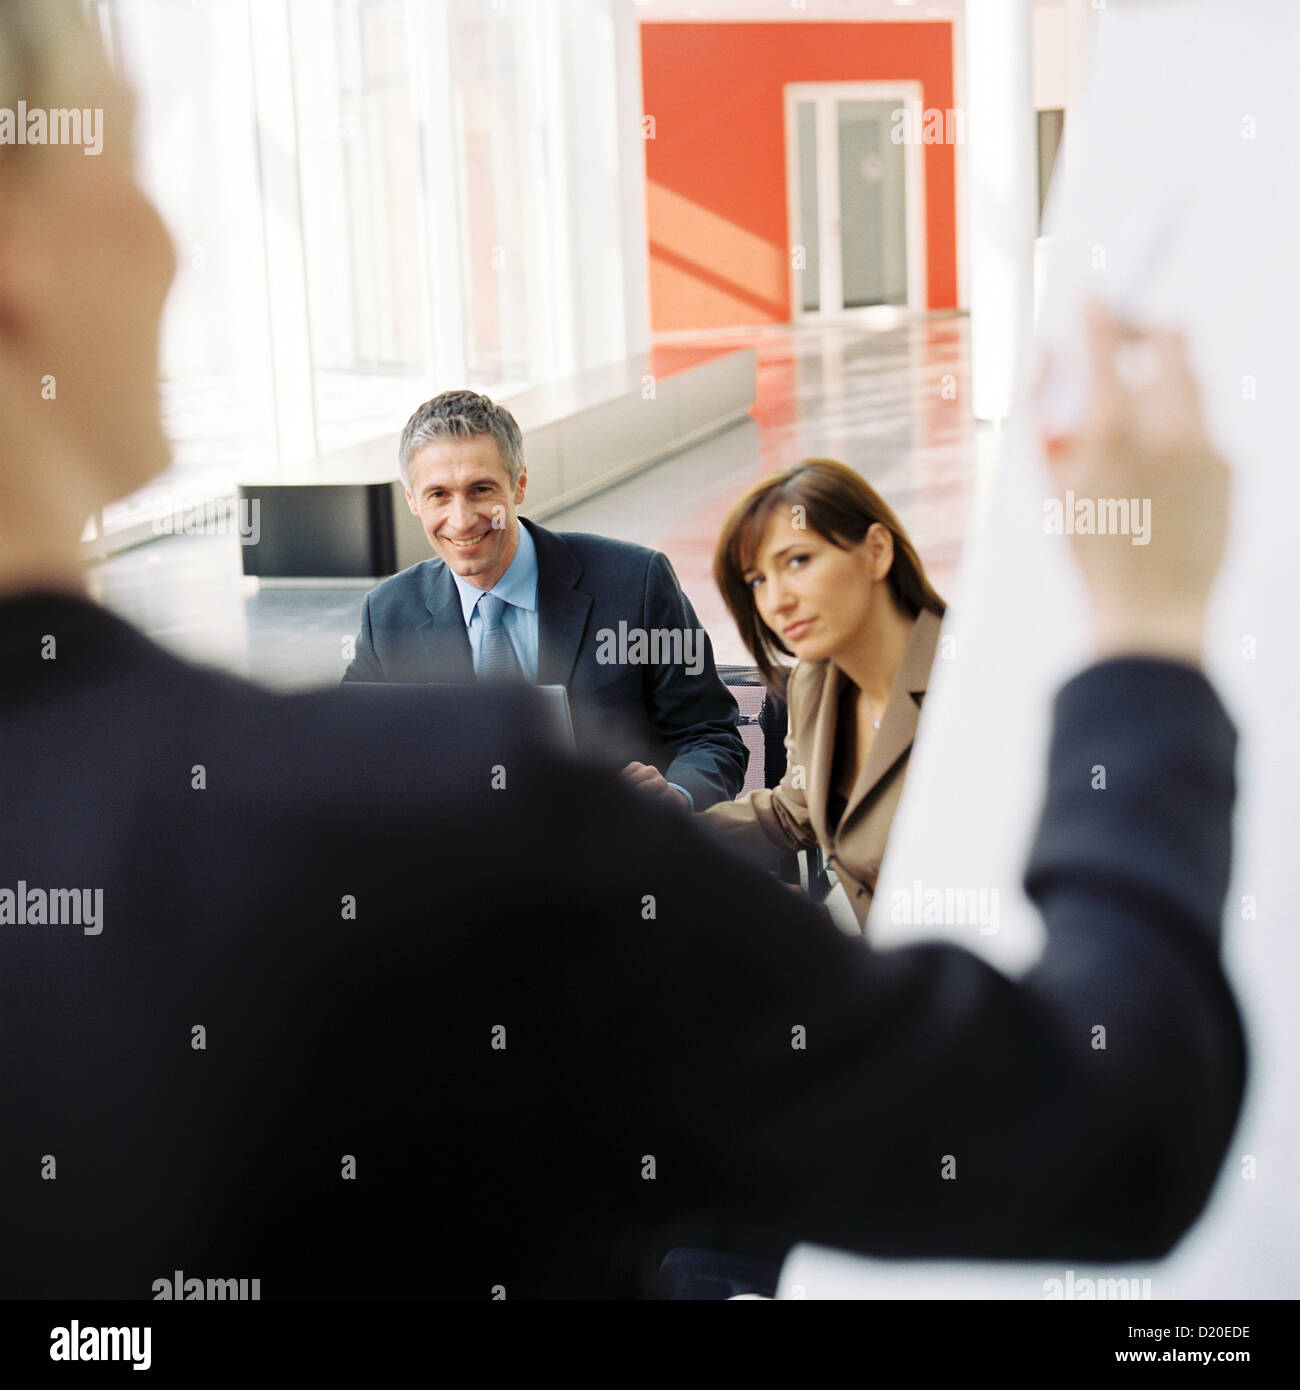 Businesswoman at chart leading meeting in conference room License free except ads and billboards Stock Photo